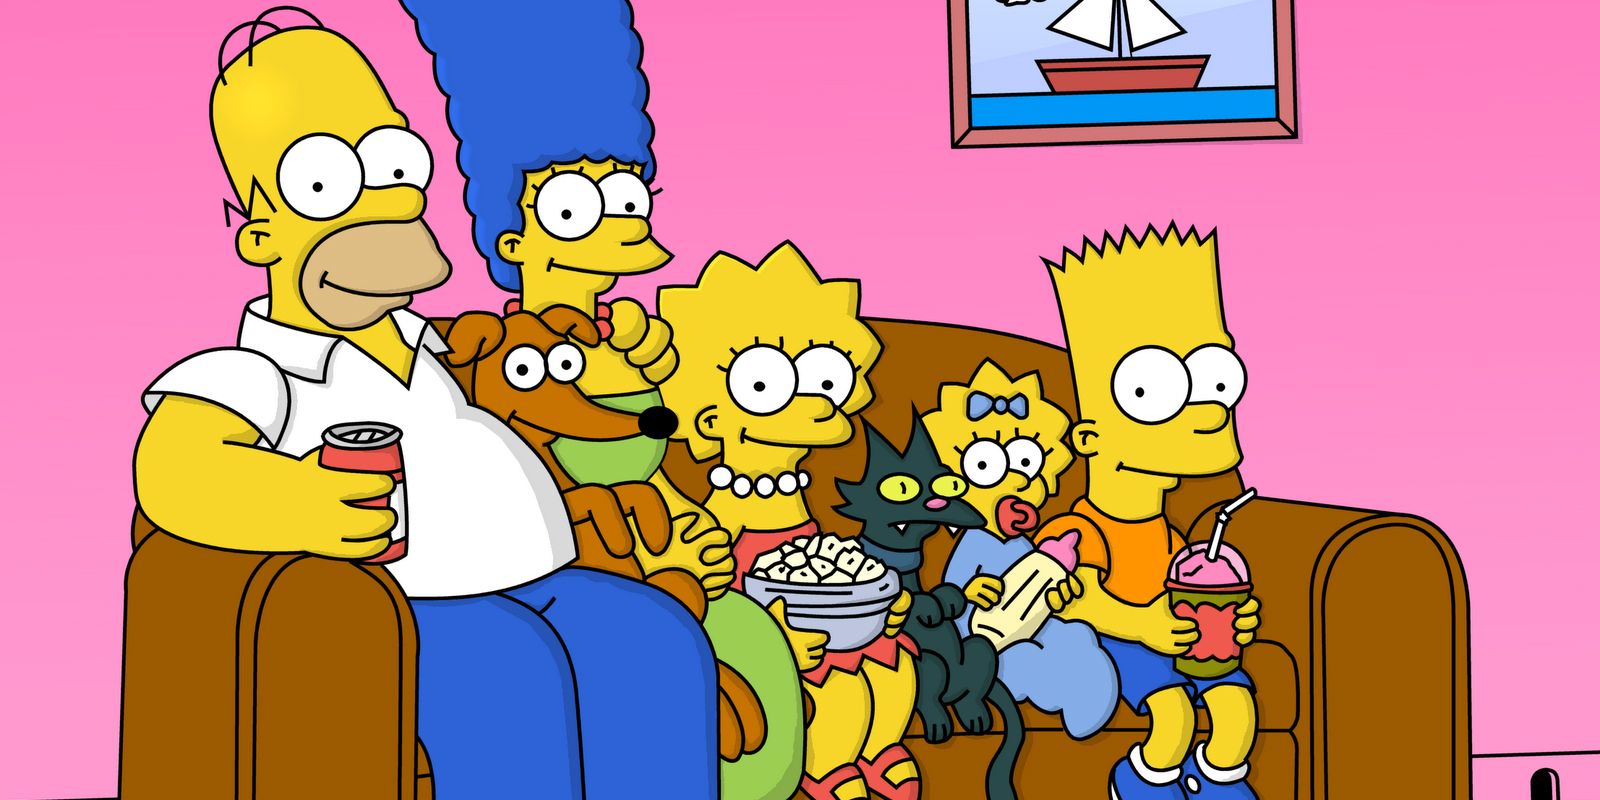 The Simpsons family and pets